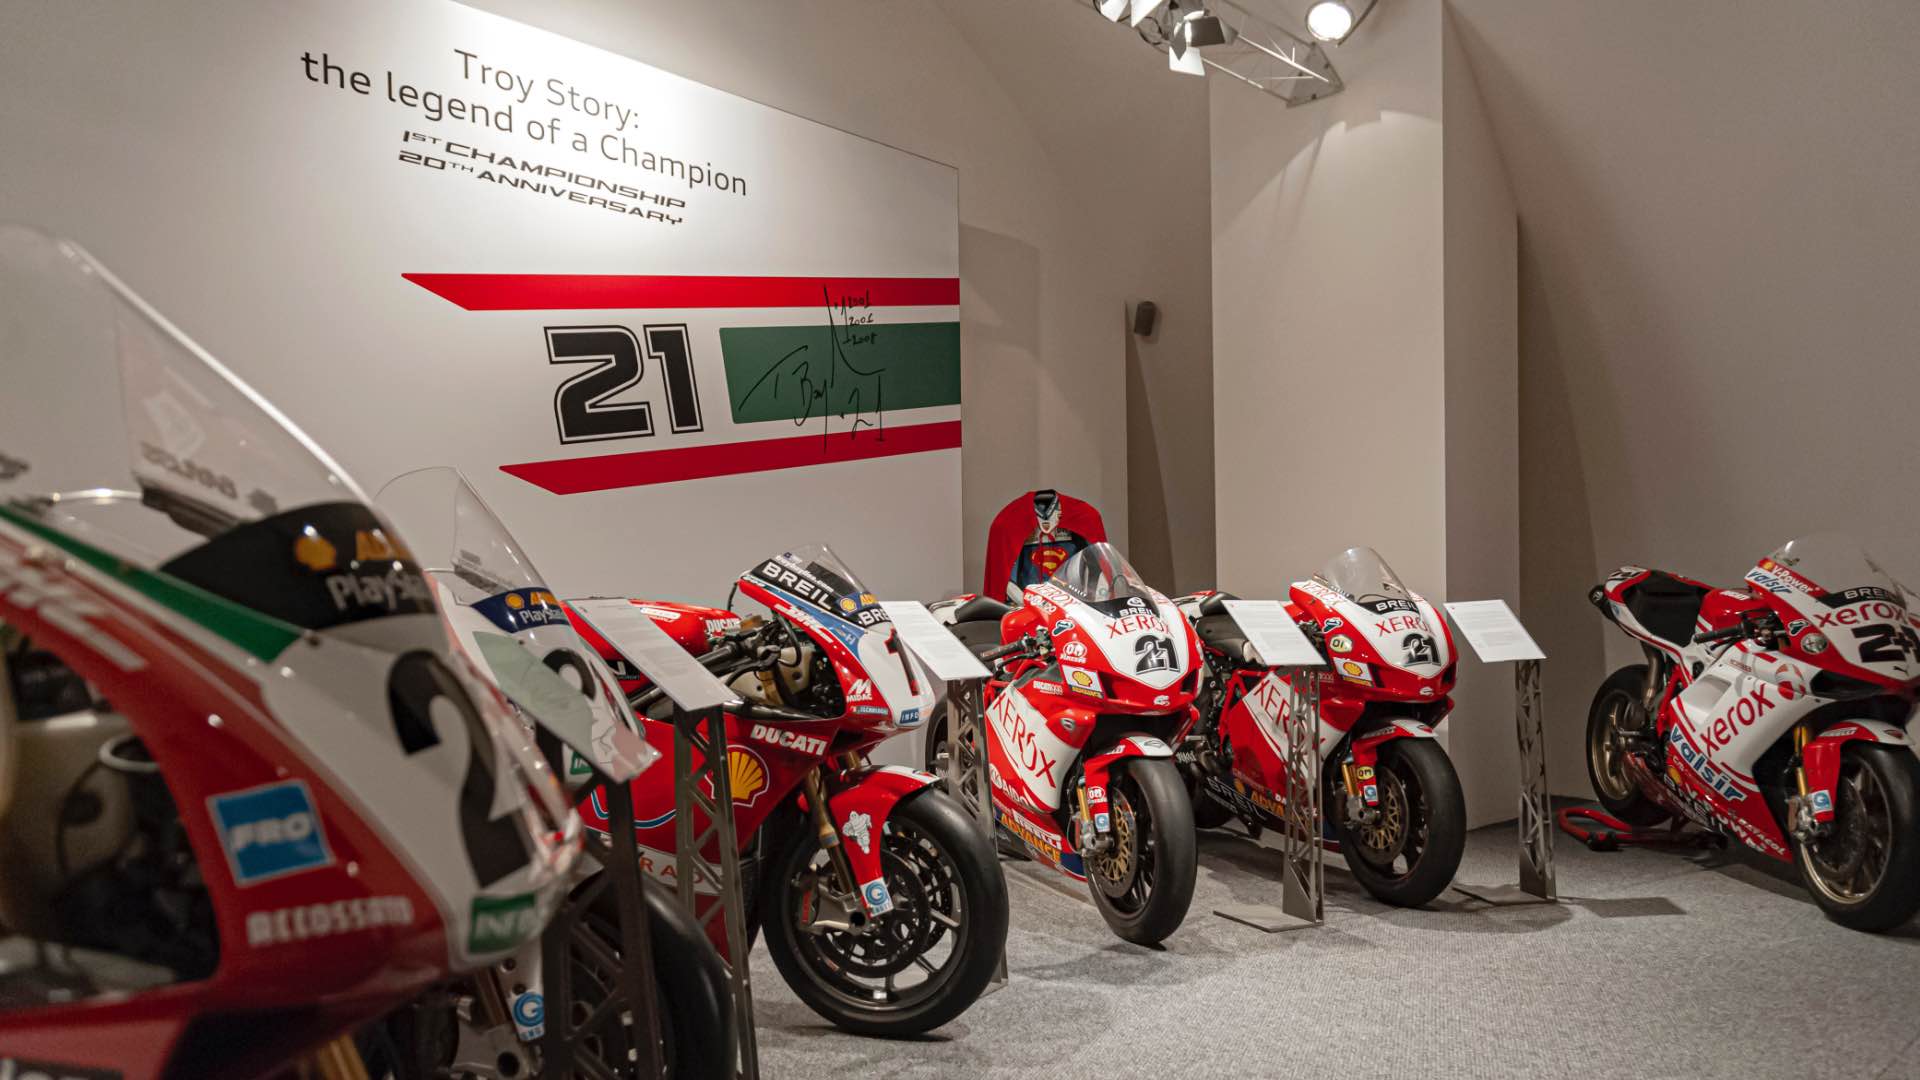 A temporary exhibition at the Ducati Museum for 20 years since Troy Bayliss’s first world title.